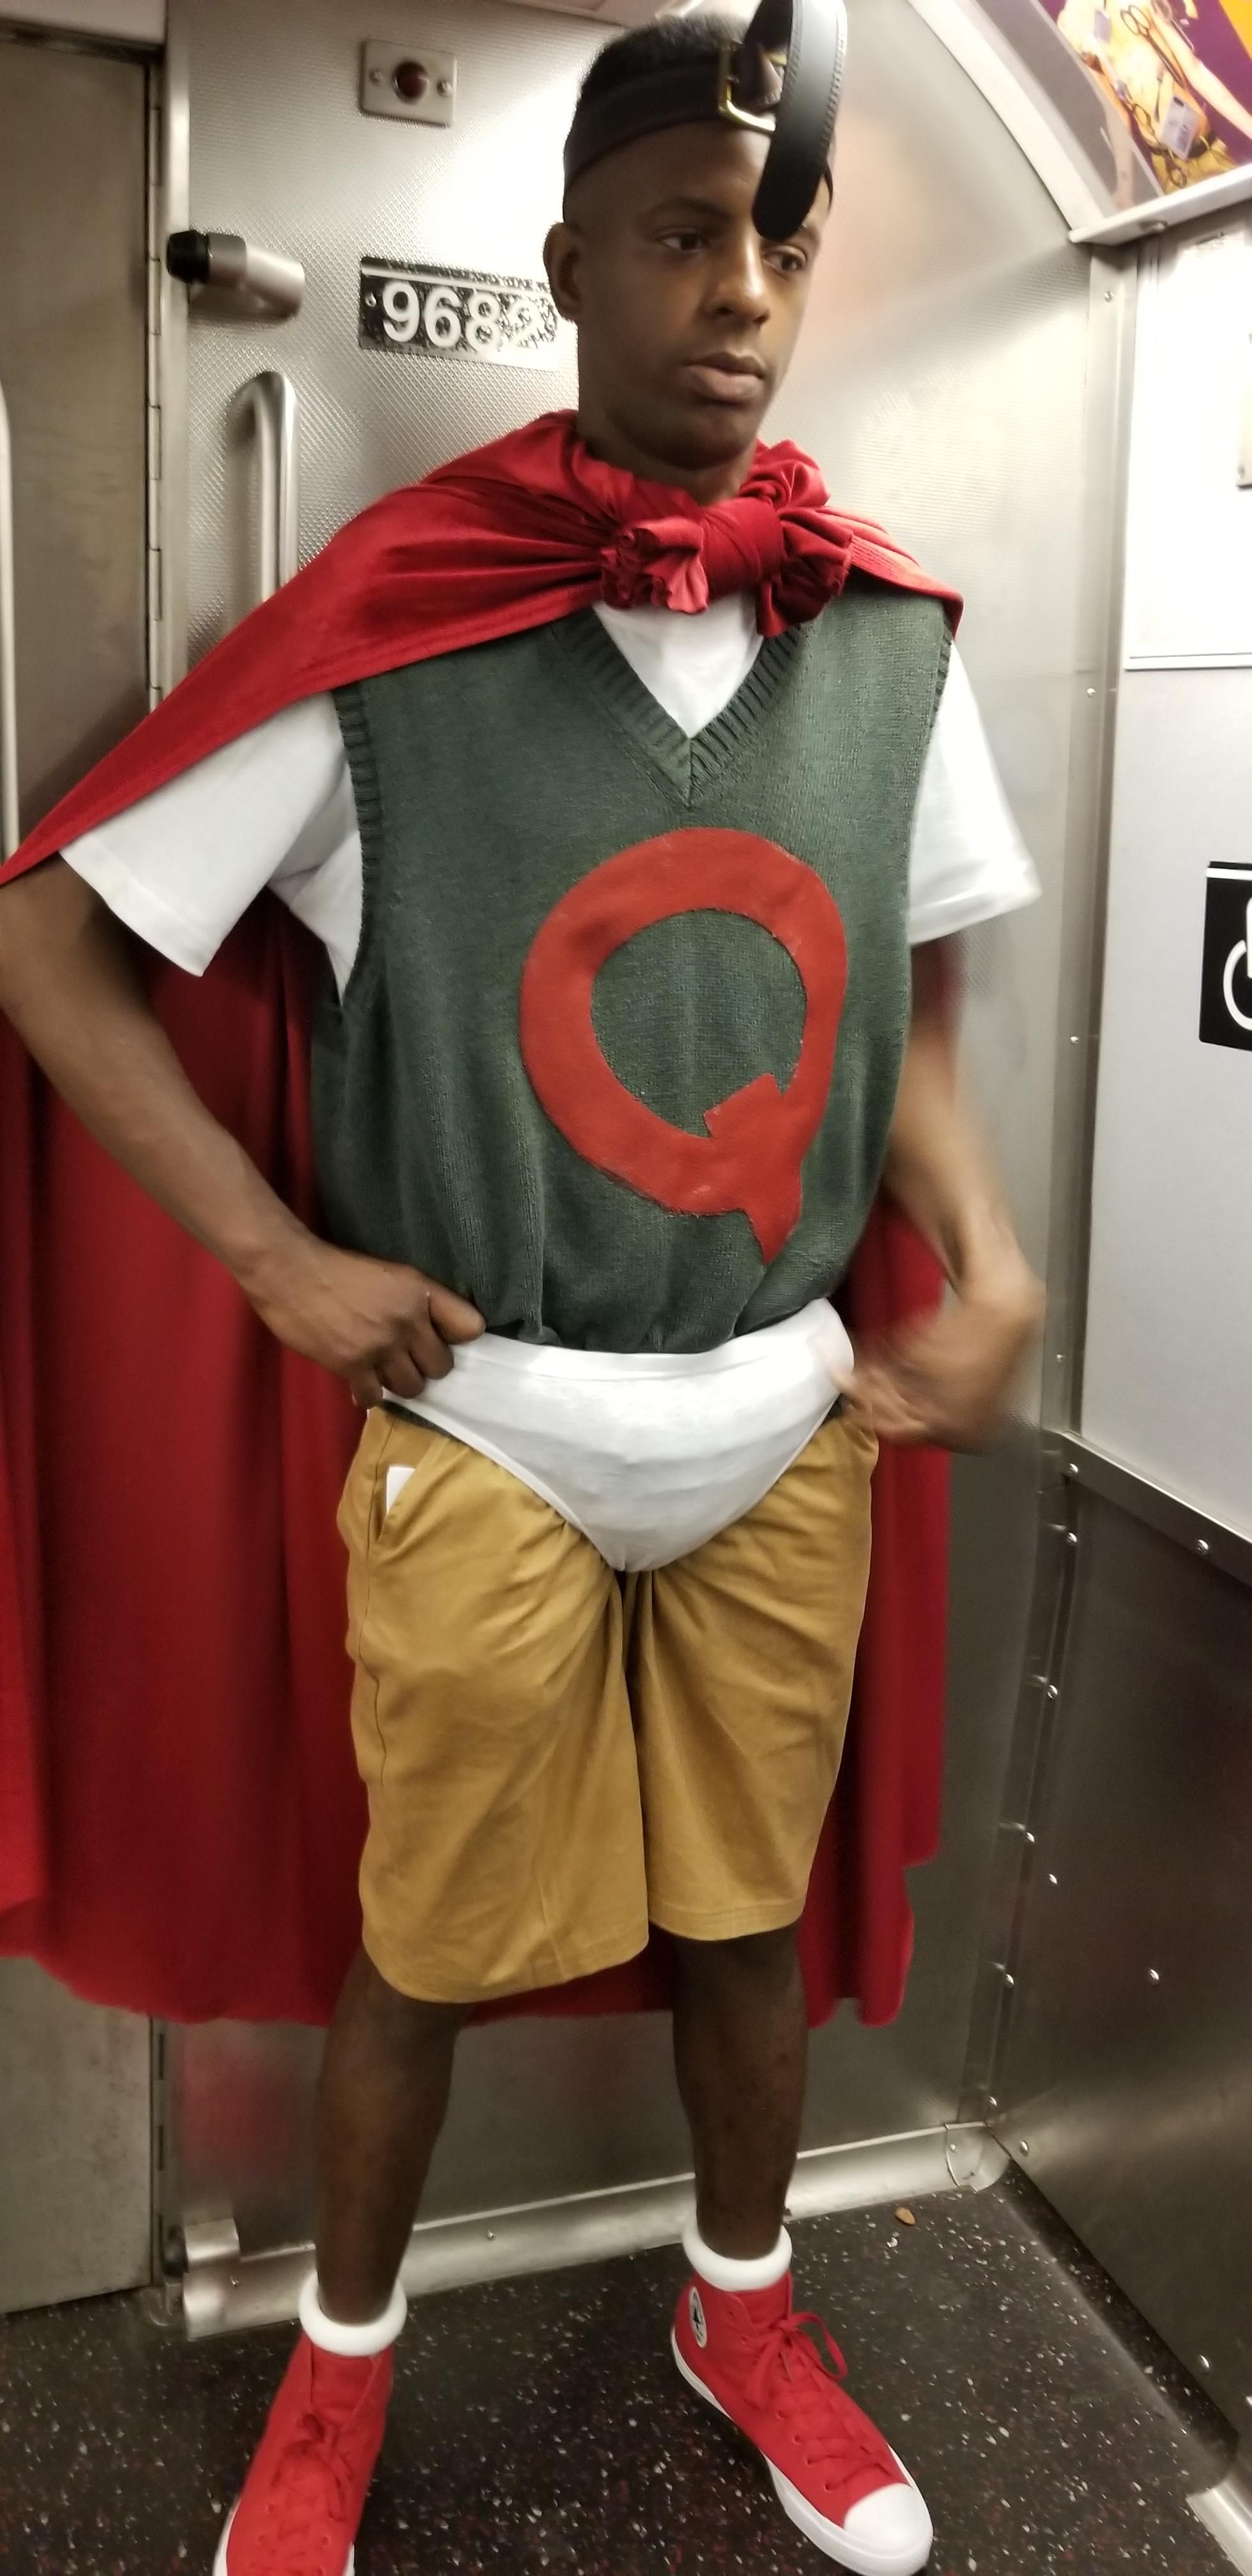 Quailman spotted in nyc!